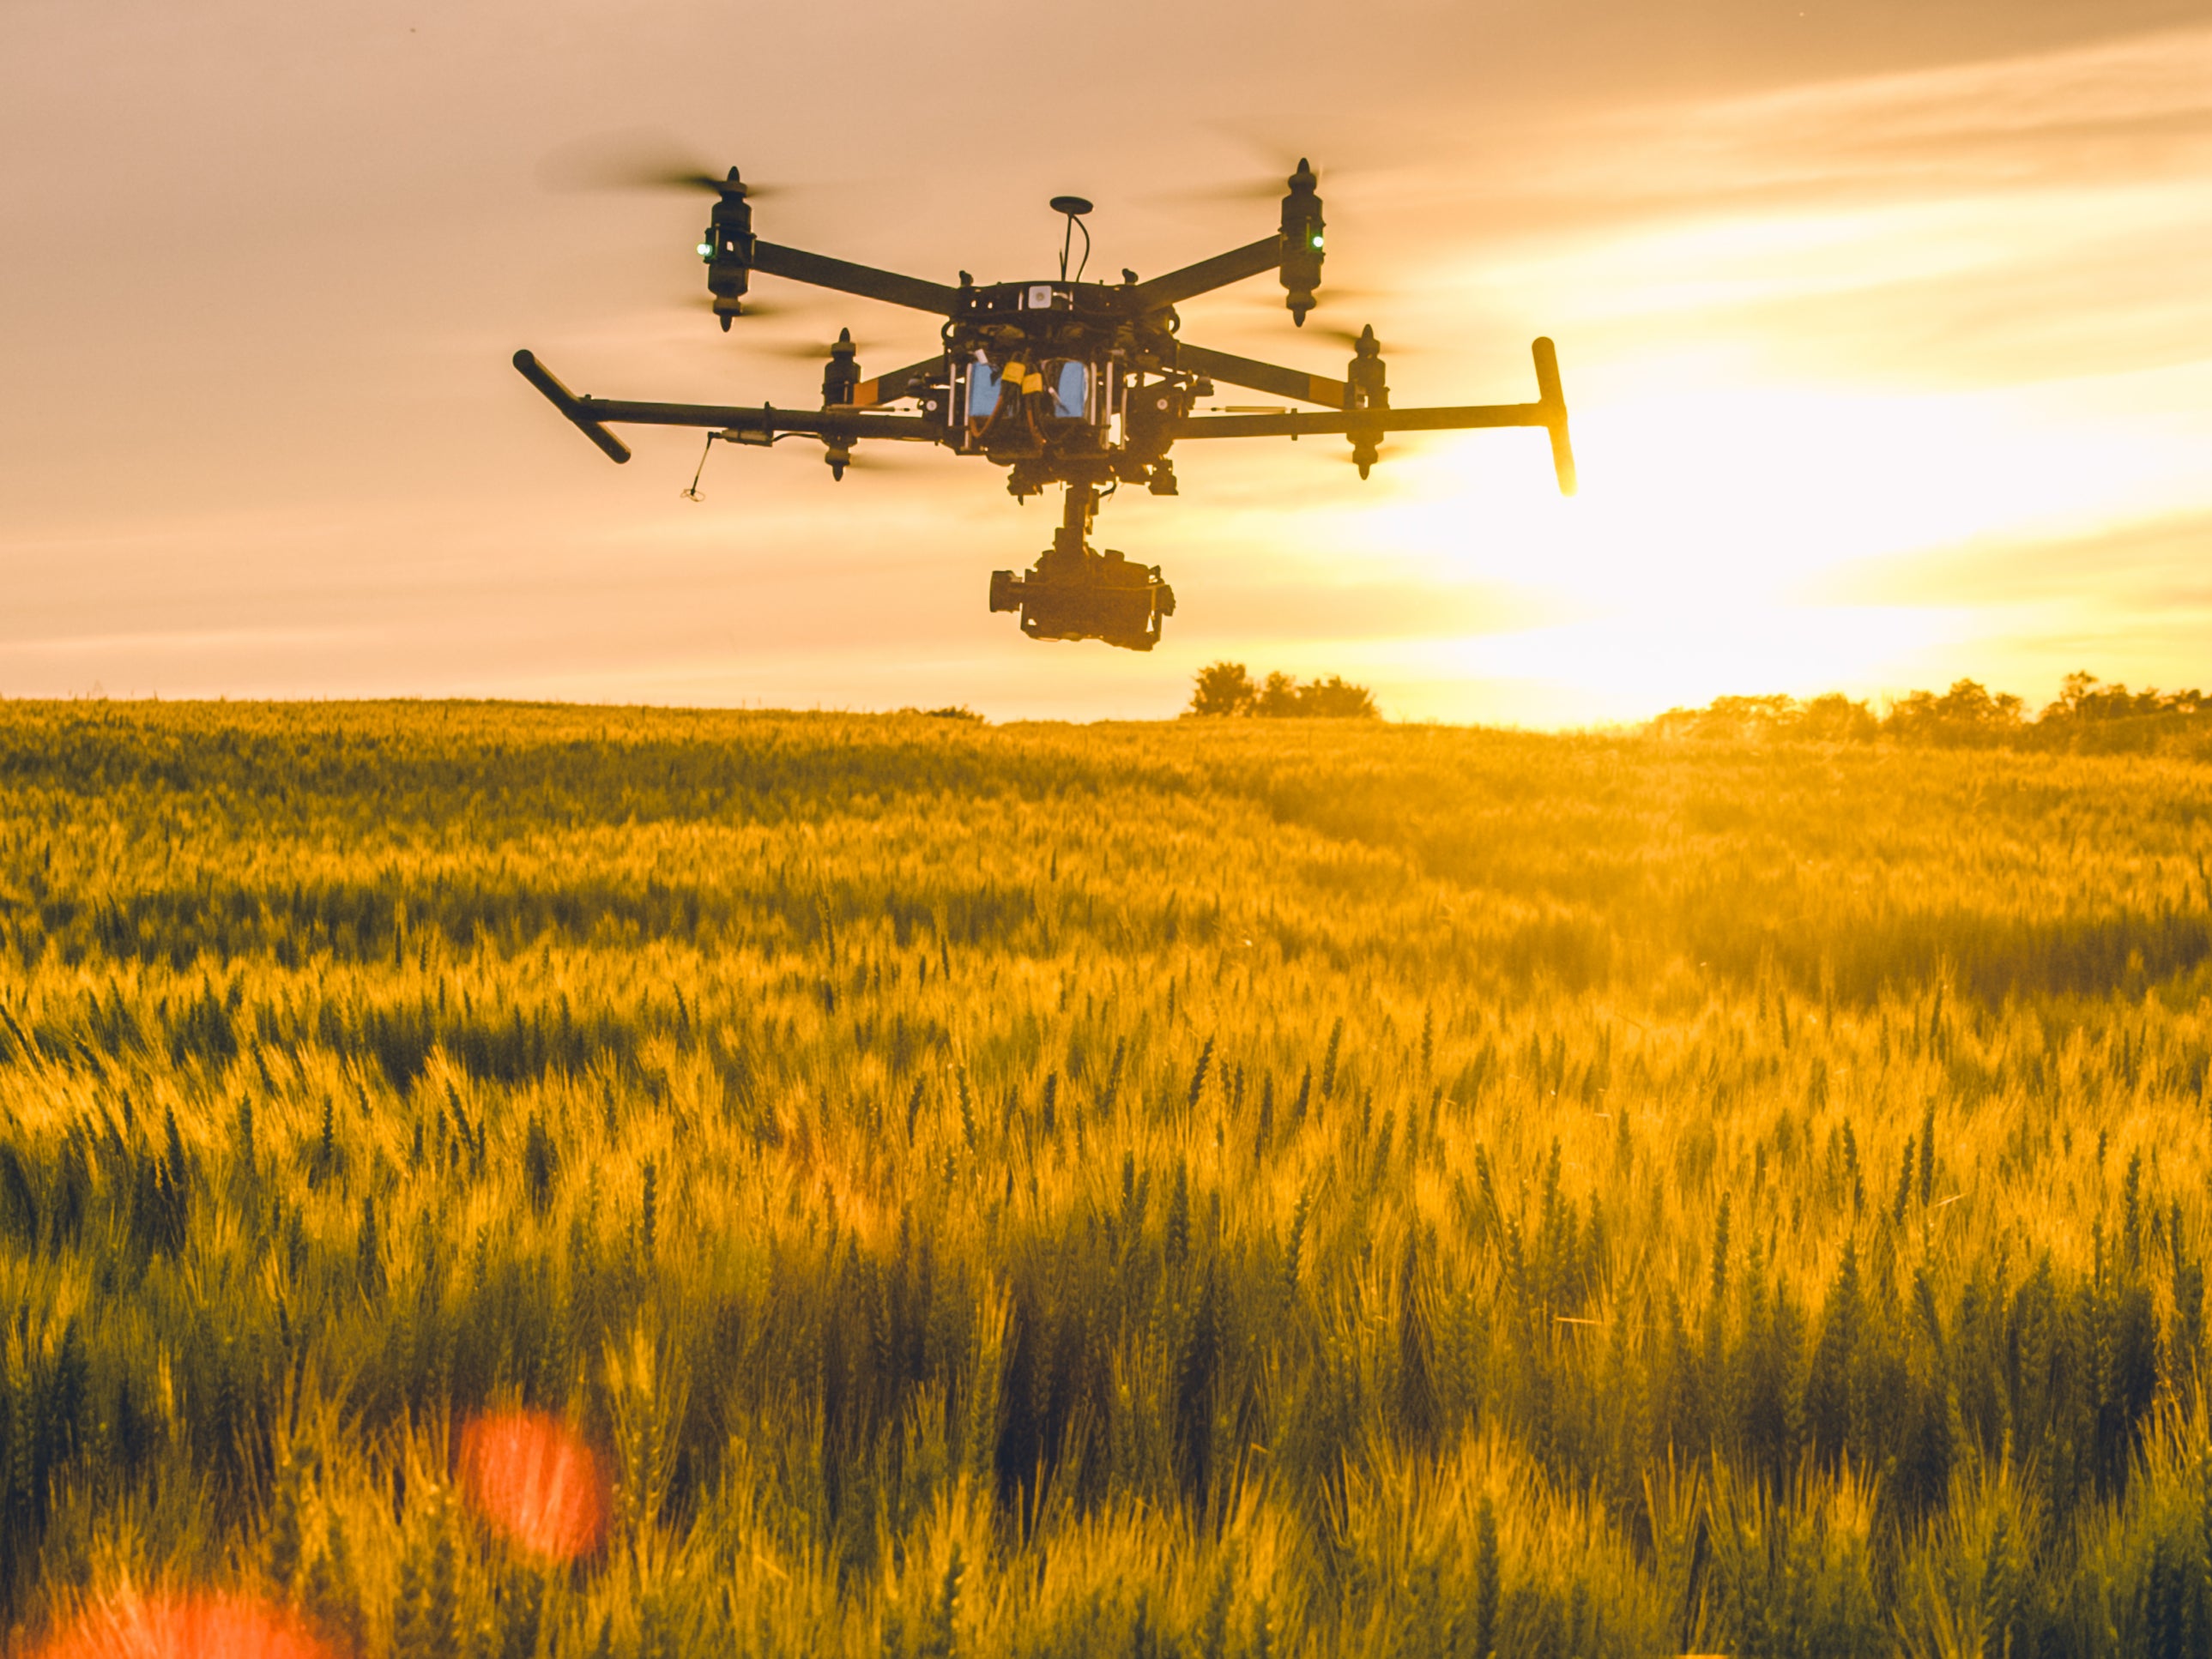 Drones with hoppers can deploy grain laced with poison across hundreds of acres a night